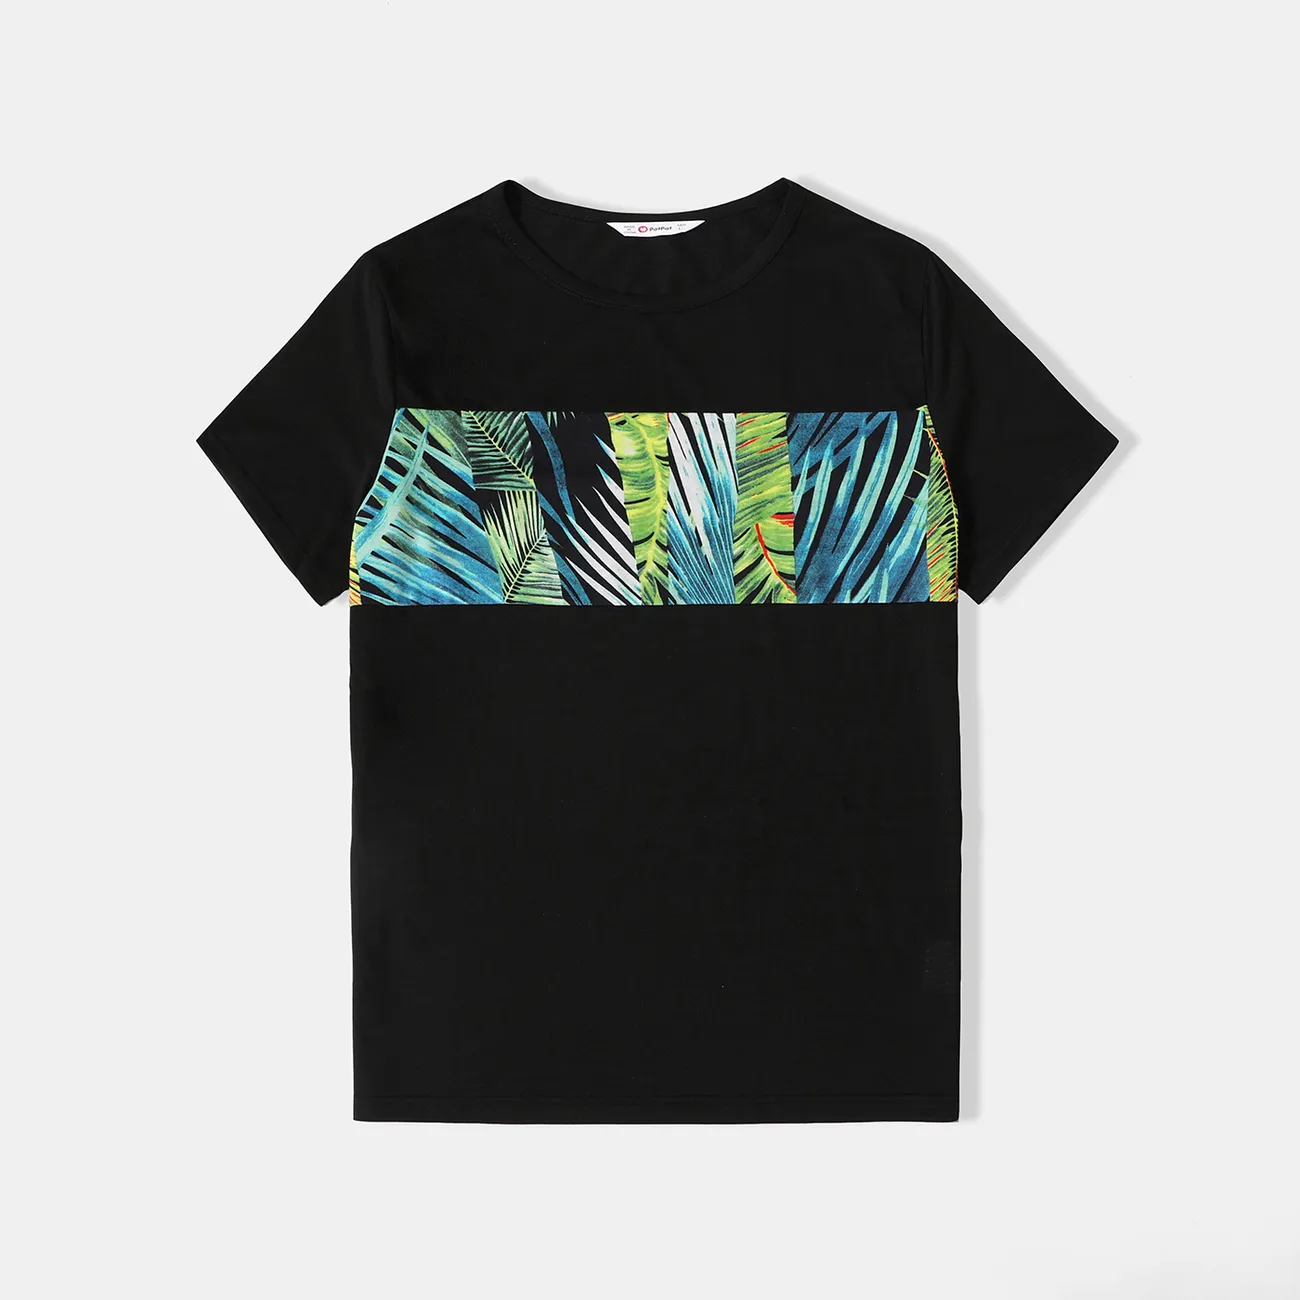 Family Matching Allover Tropical Plant Print Spliced Black Cami Dresses and Short-sleeve Tops Sets Turquoise big image 1